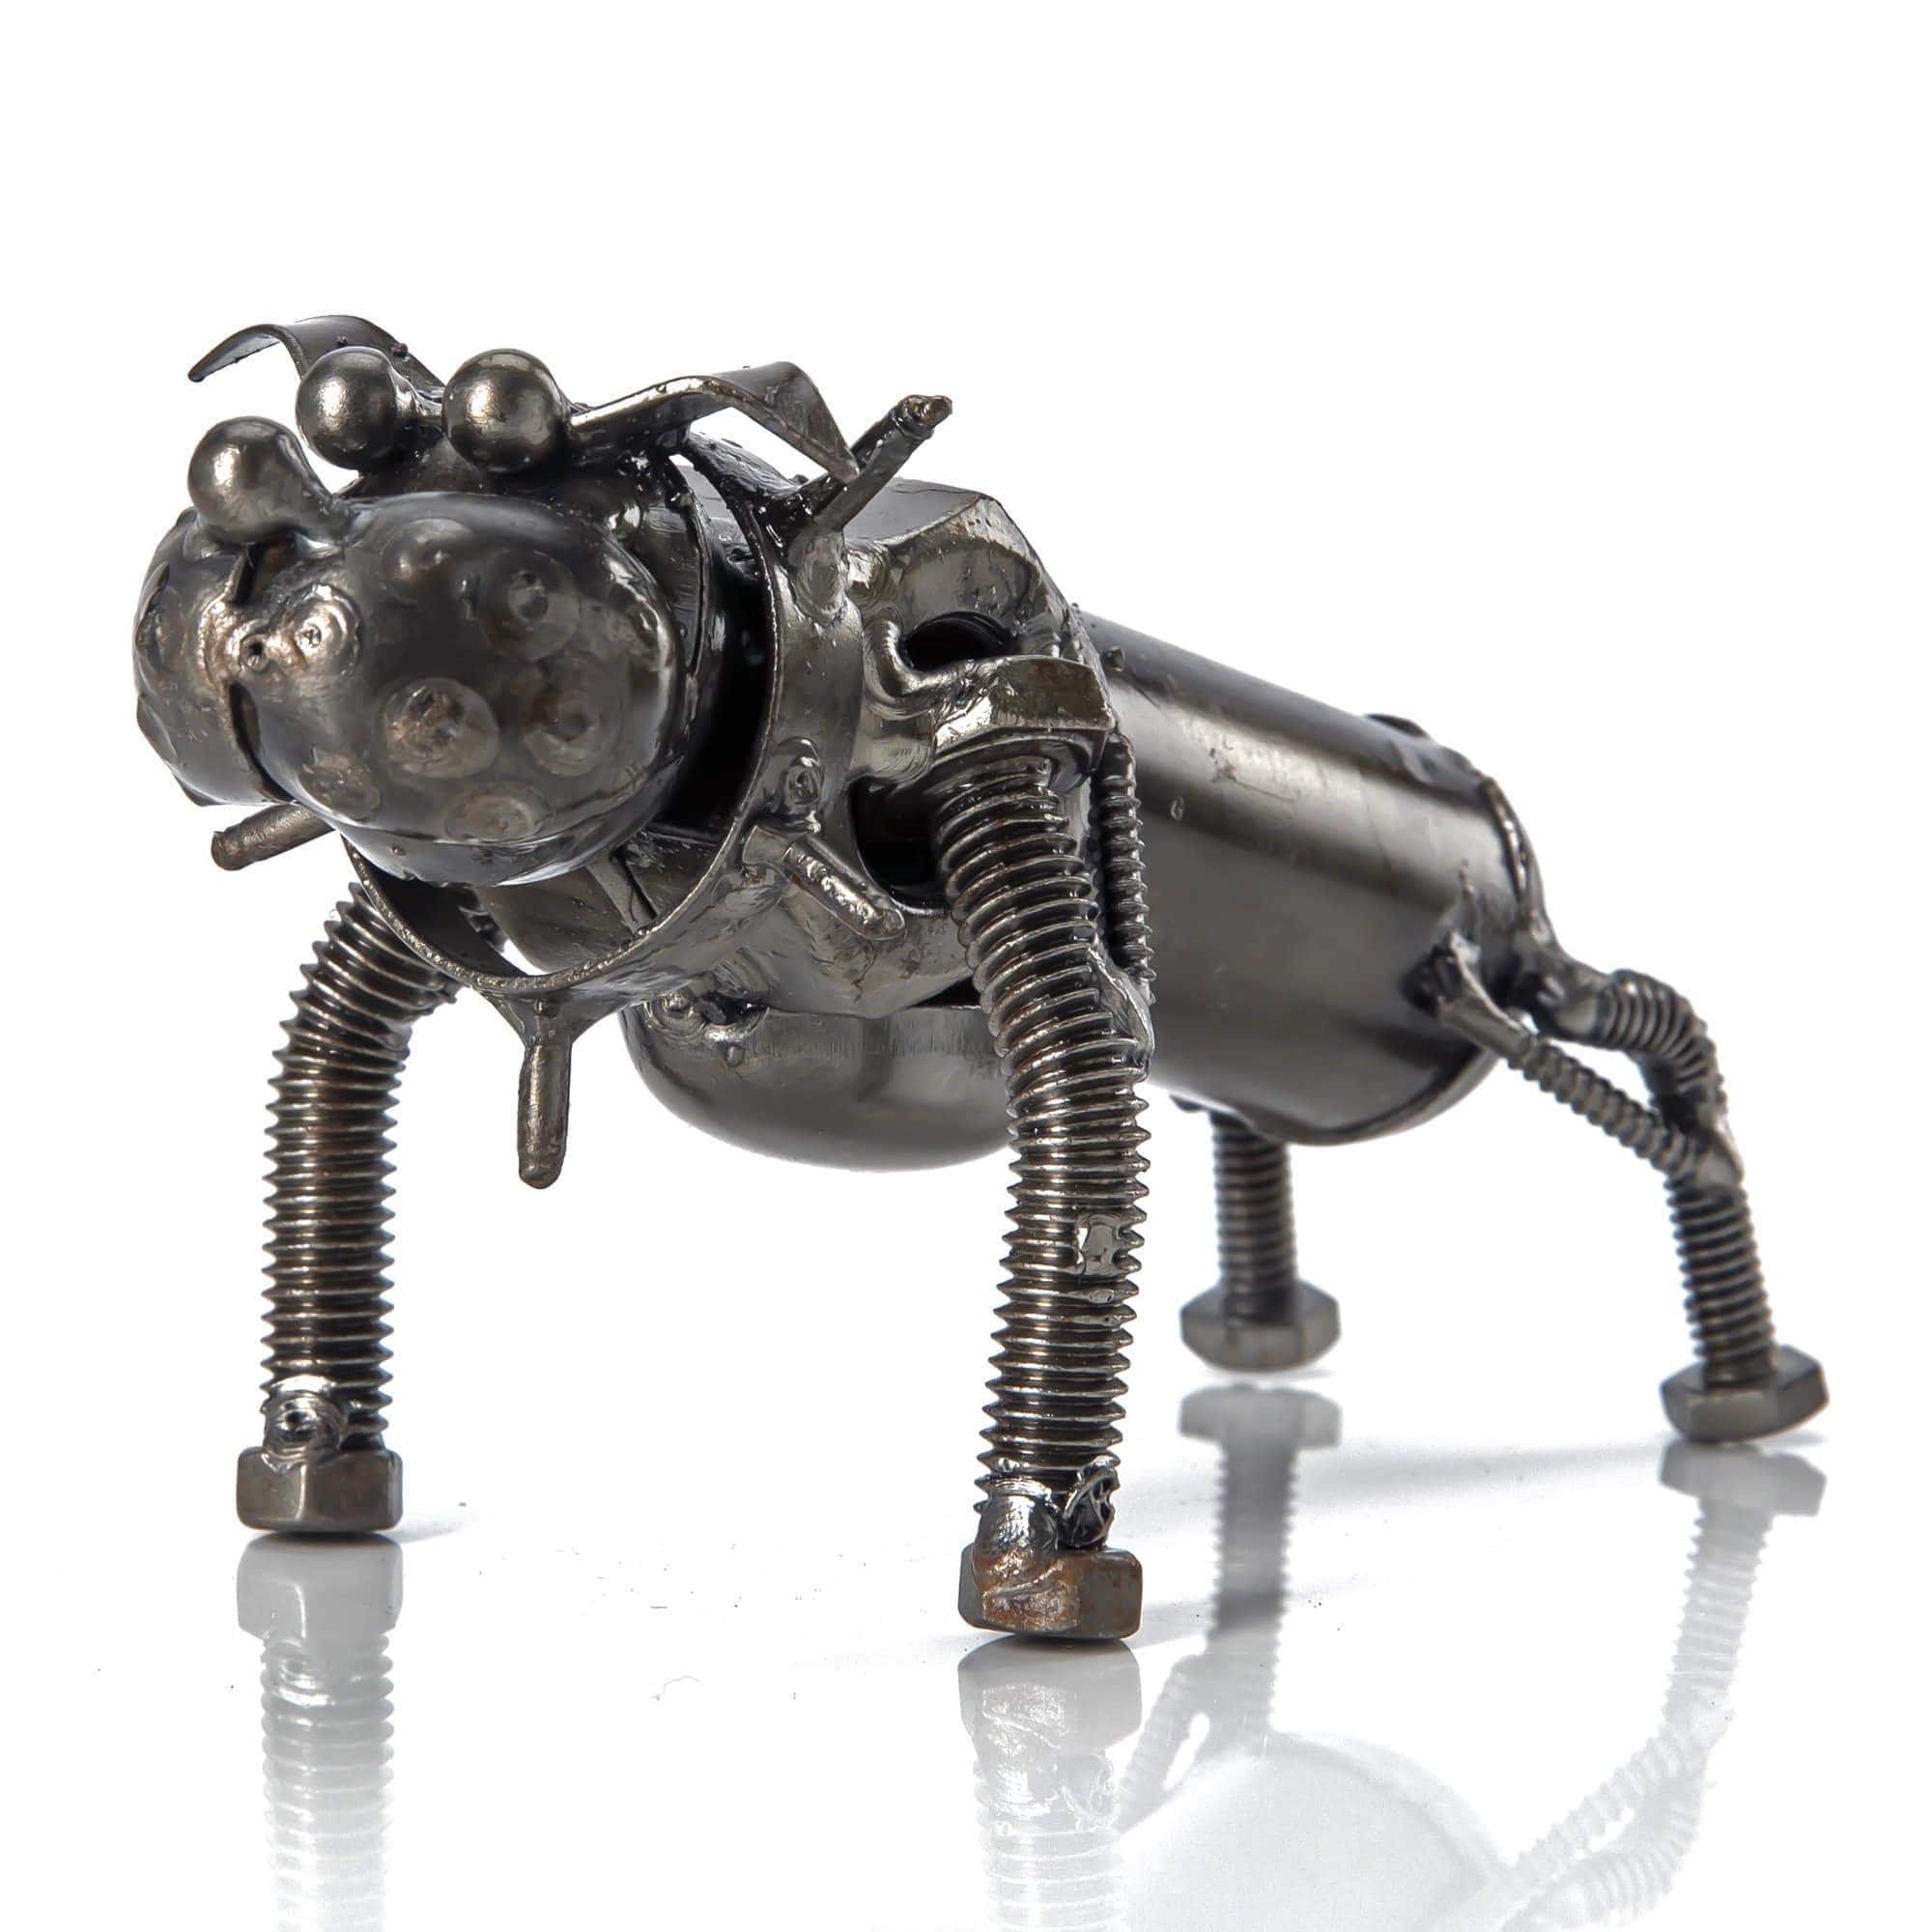 Kalifano Recycled Metal Art Bull Dog Inspired Recycled Metal Sculpture RMS-150DOG-N